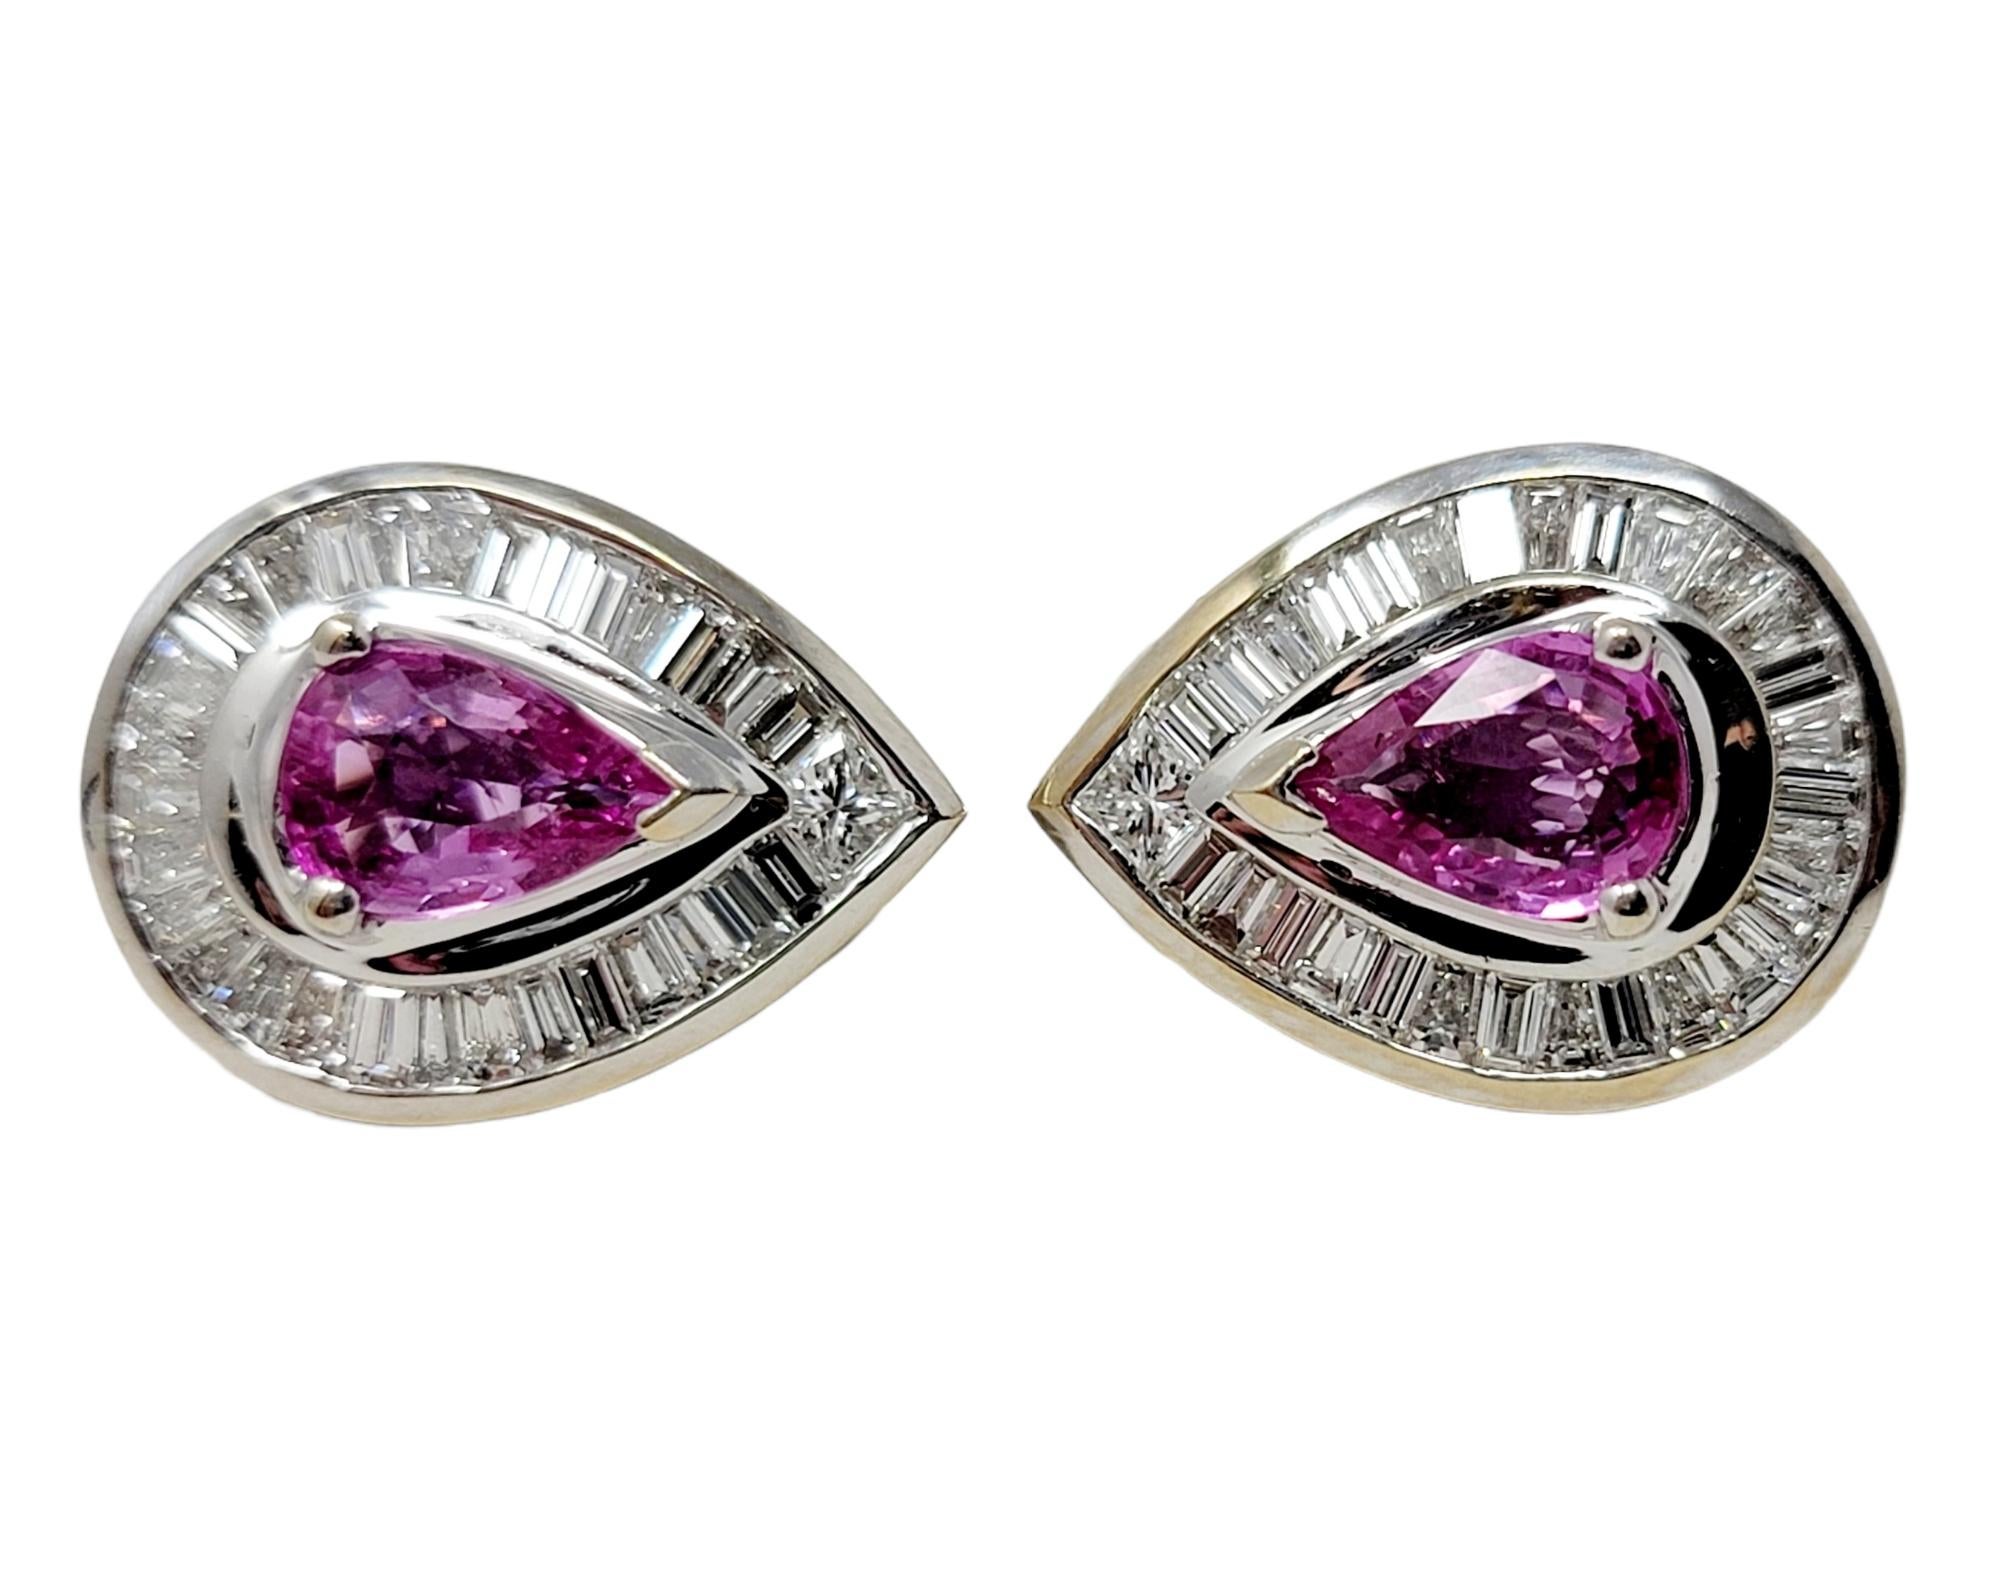 These incredible natural pink sapphire and diamond halo studs are absolutely gorgeous. The vibrant pink color of the sapphire really pops against the icy white diamonds, while the stones sparkle and shine from every angle. Each earring features a